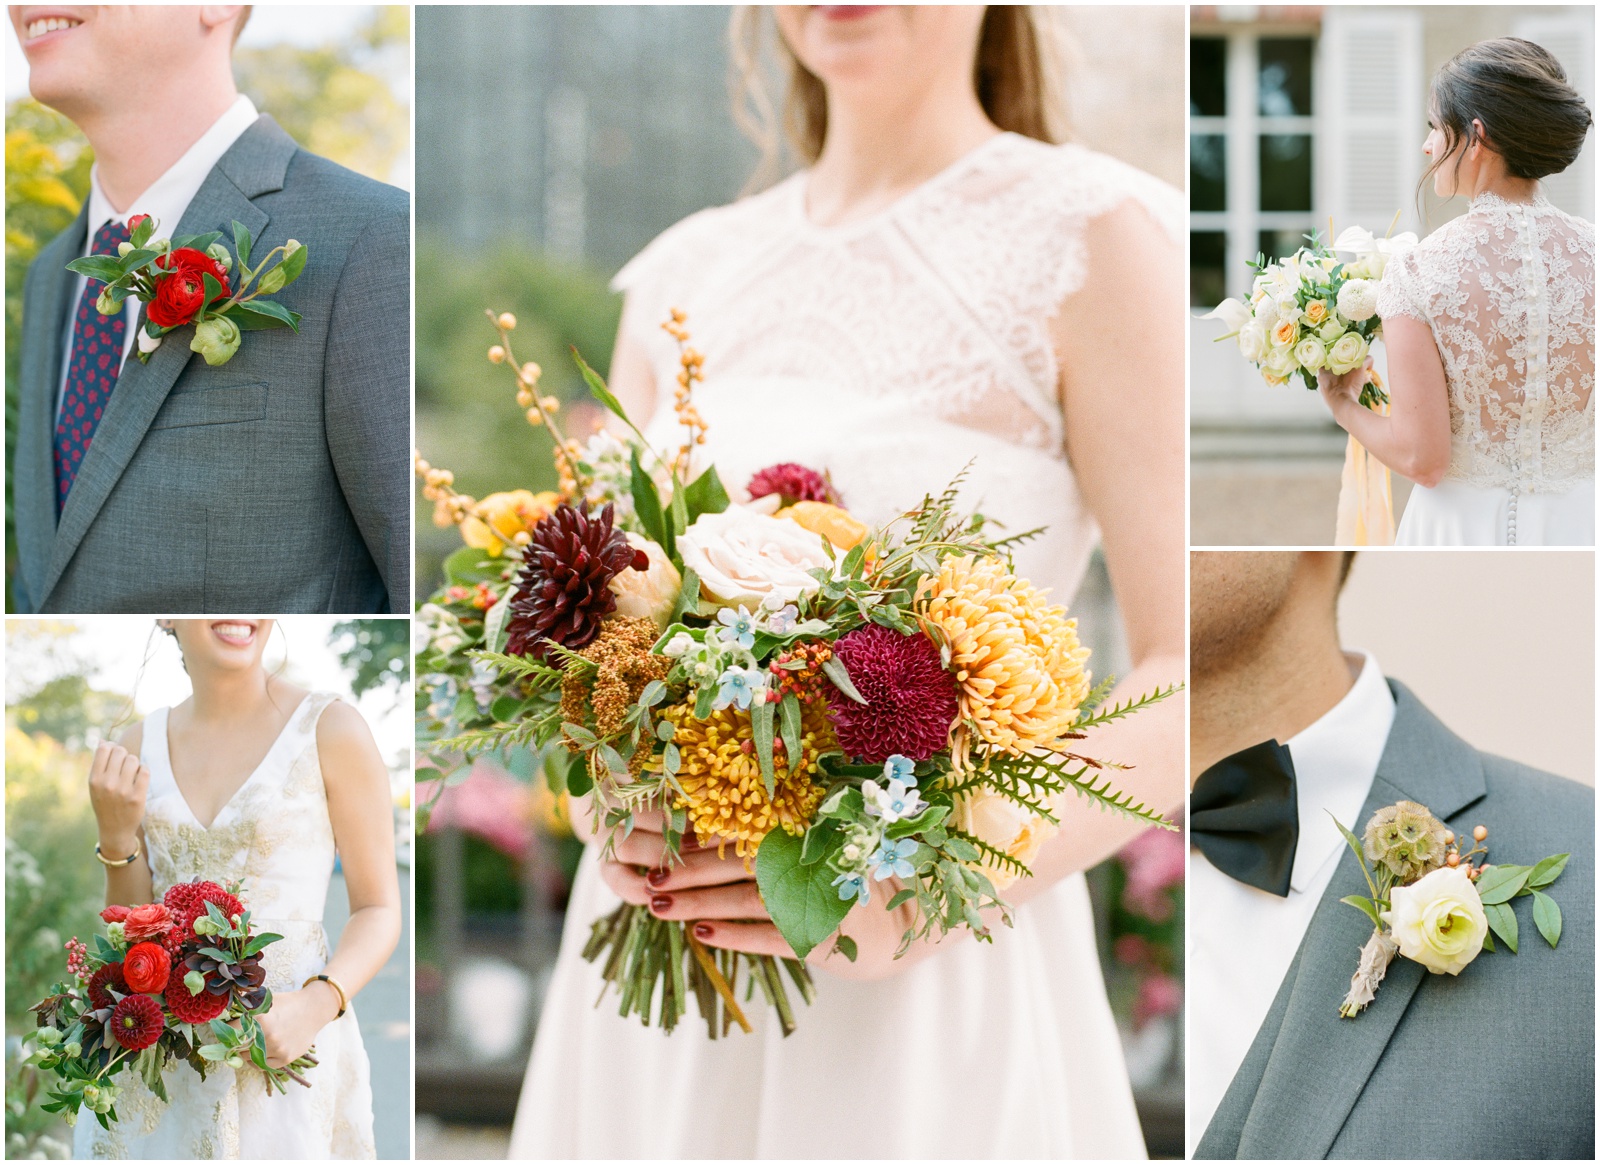 5 tips for a memorable microwedding - invest in a quality bouquet and boutonniere